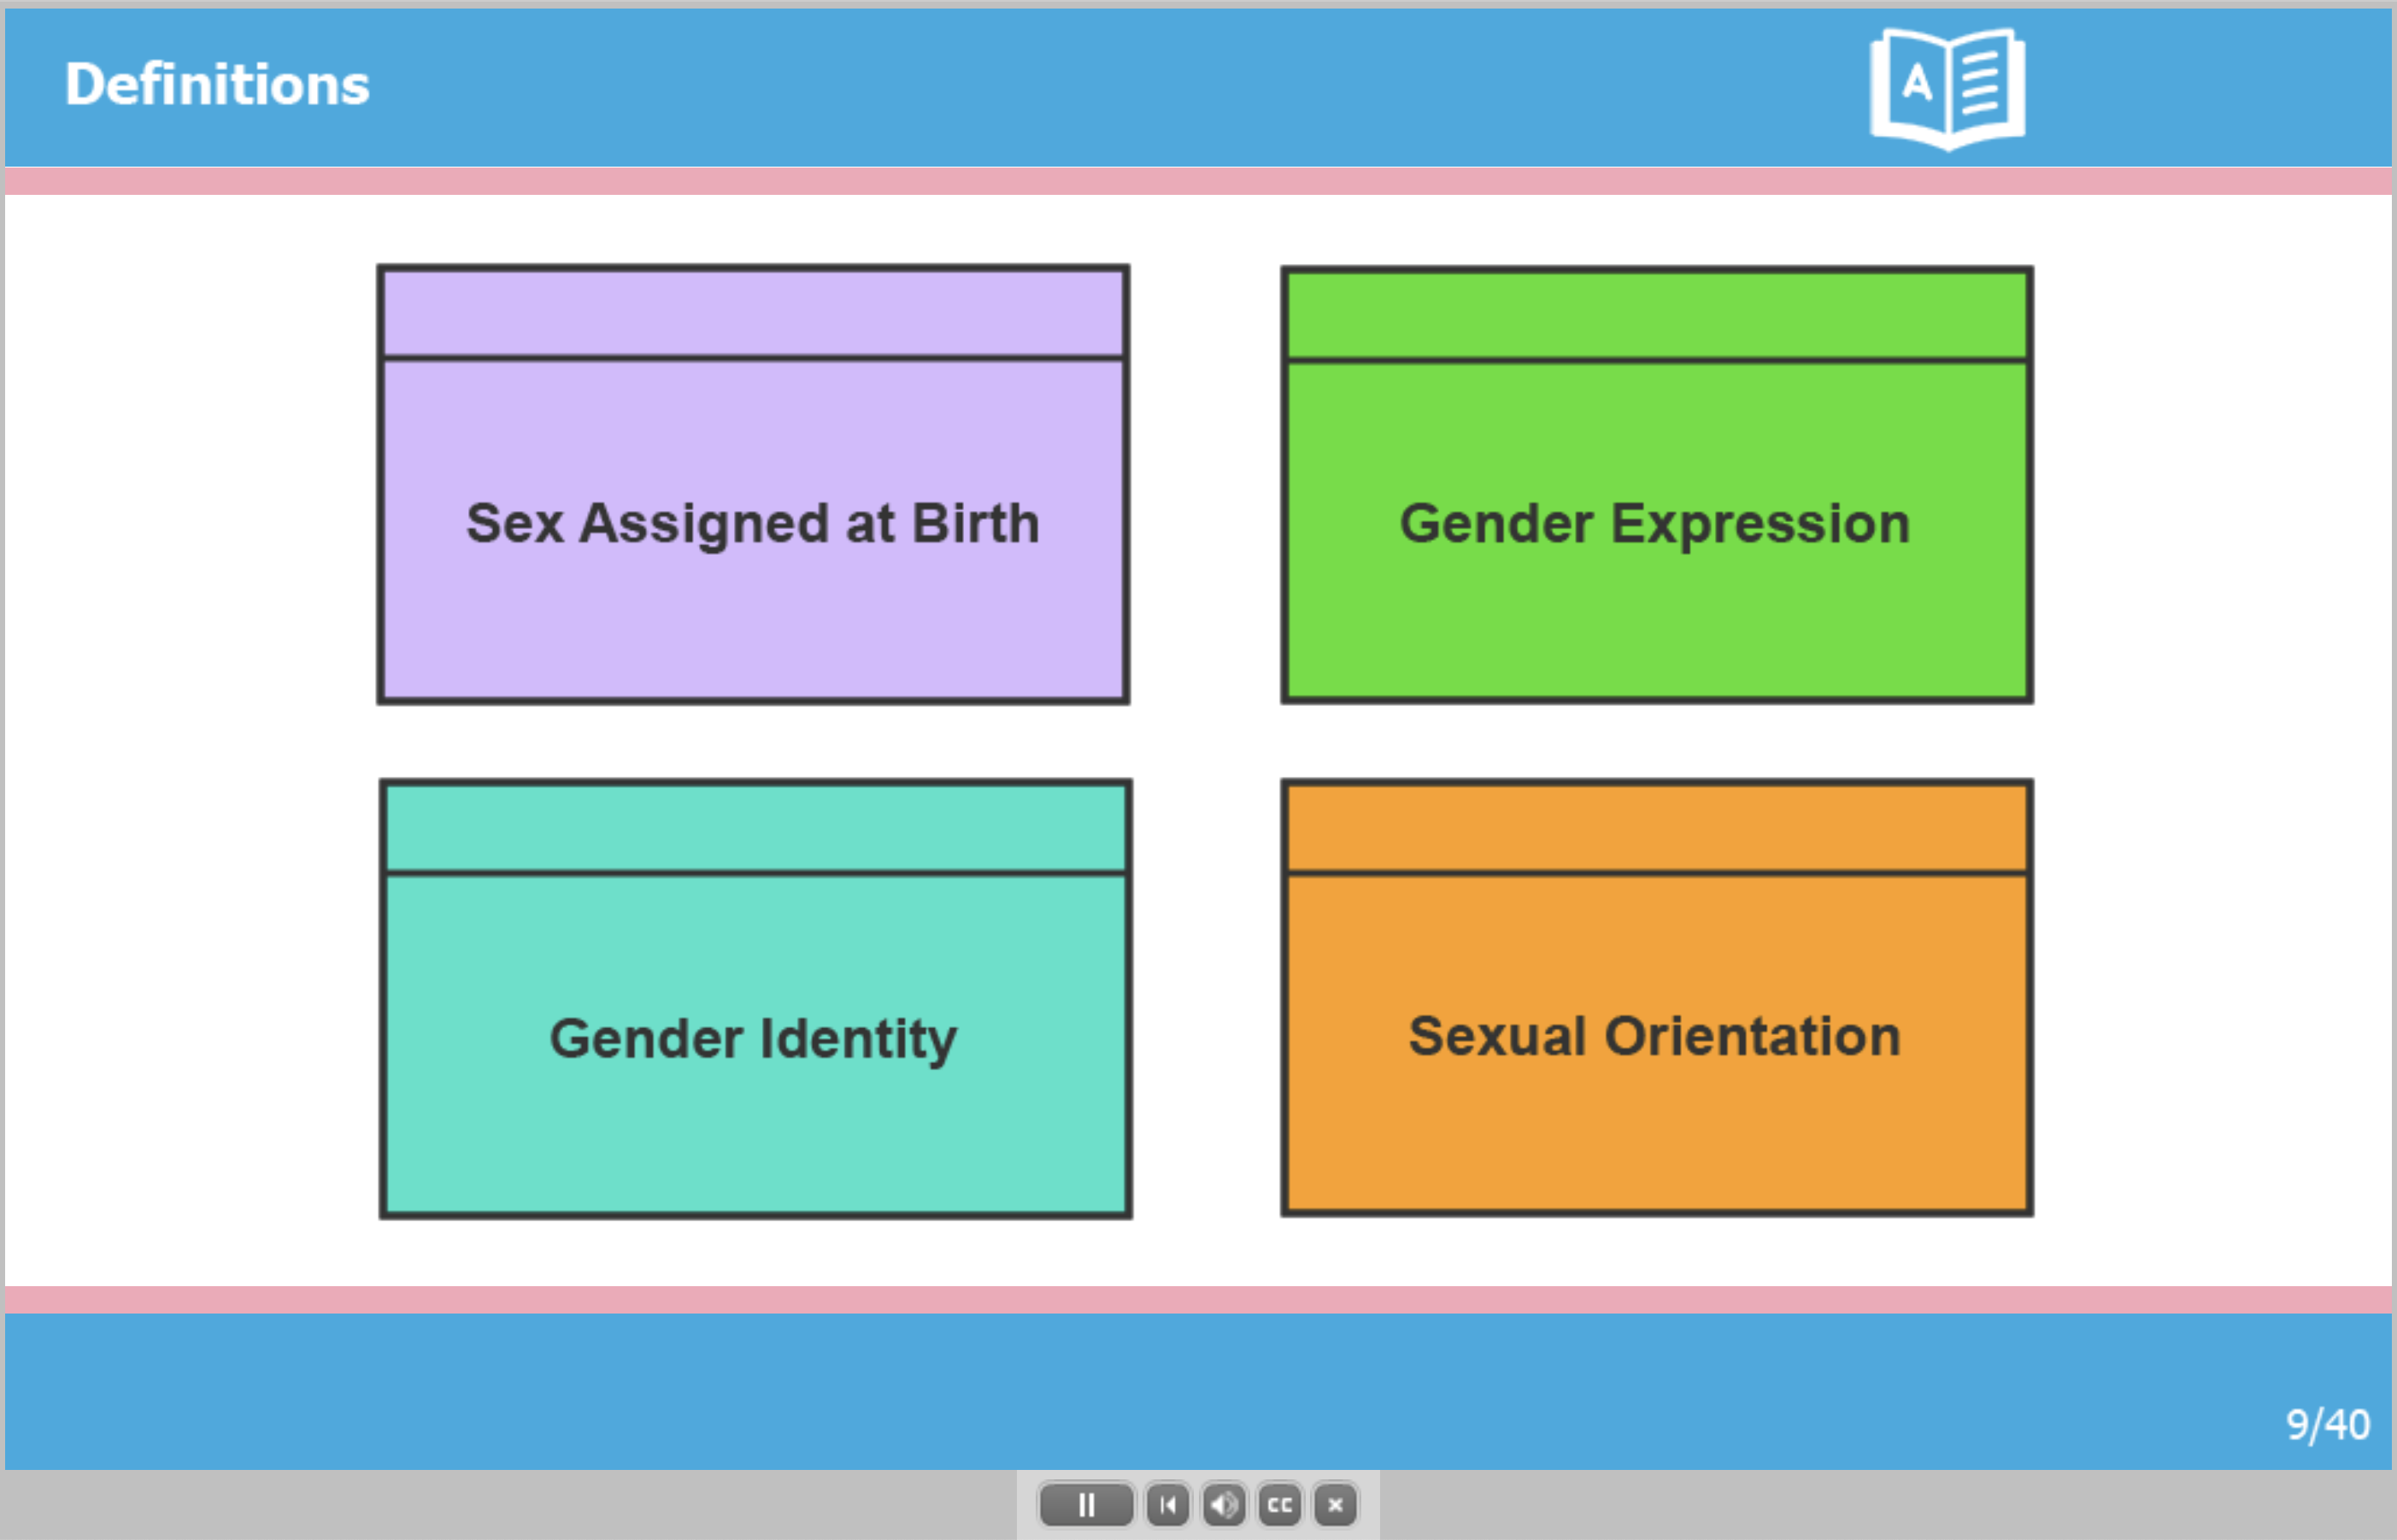 Screenshot of slide with header "Definitions" and boxes reading "Sex Assigned at Birth", "Gender Expression", "Gender Identity", and "Sexual Orientation".